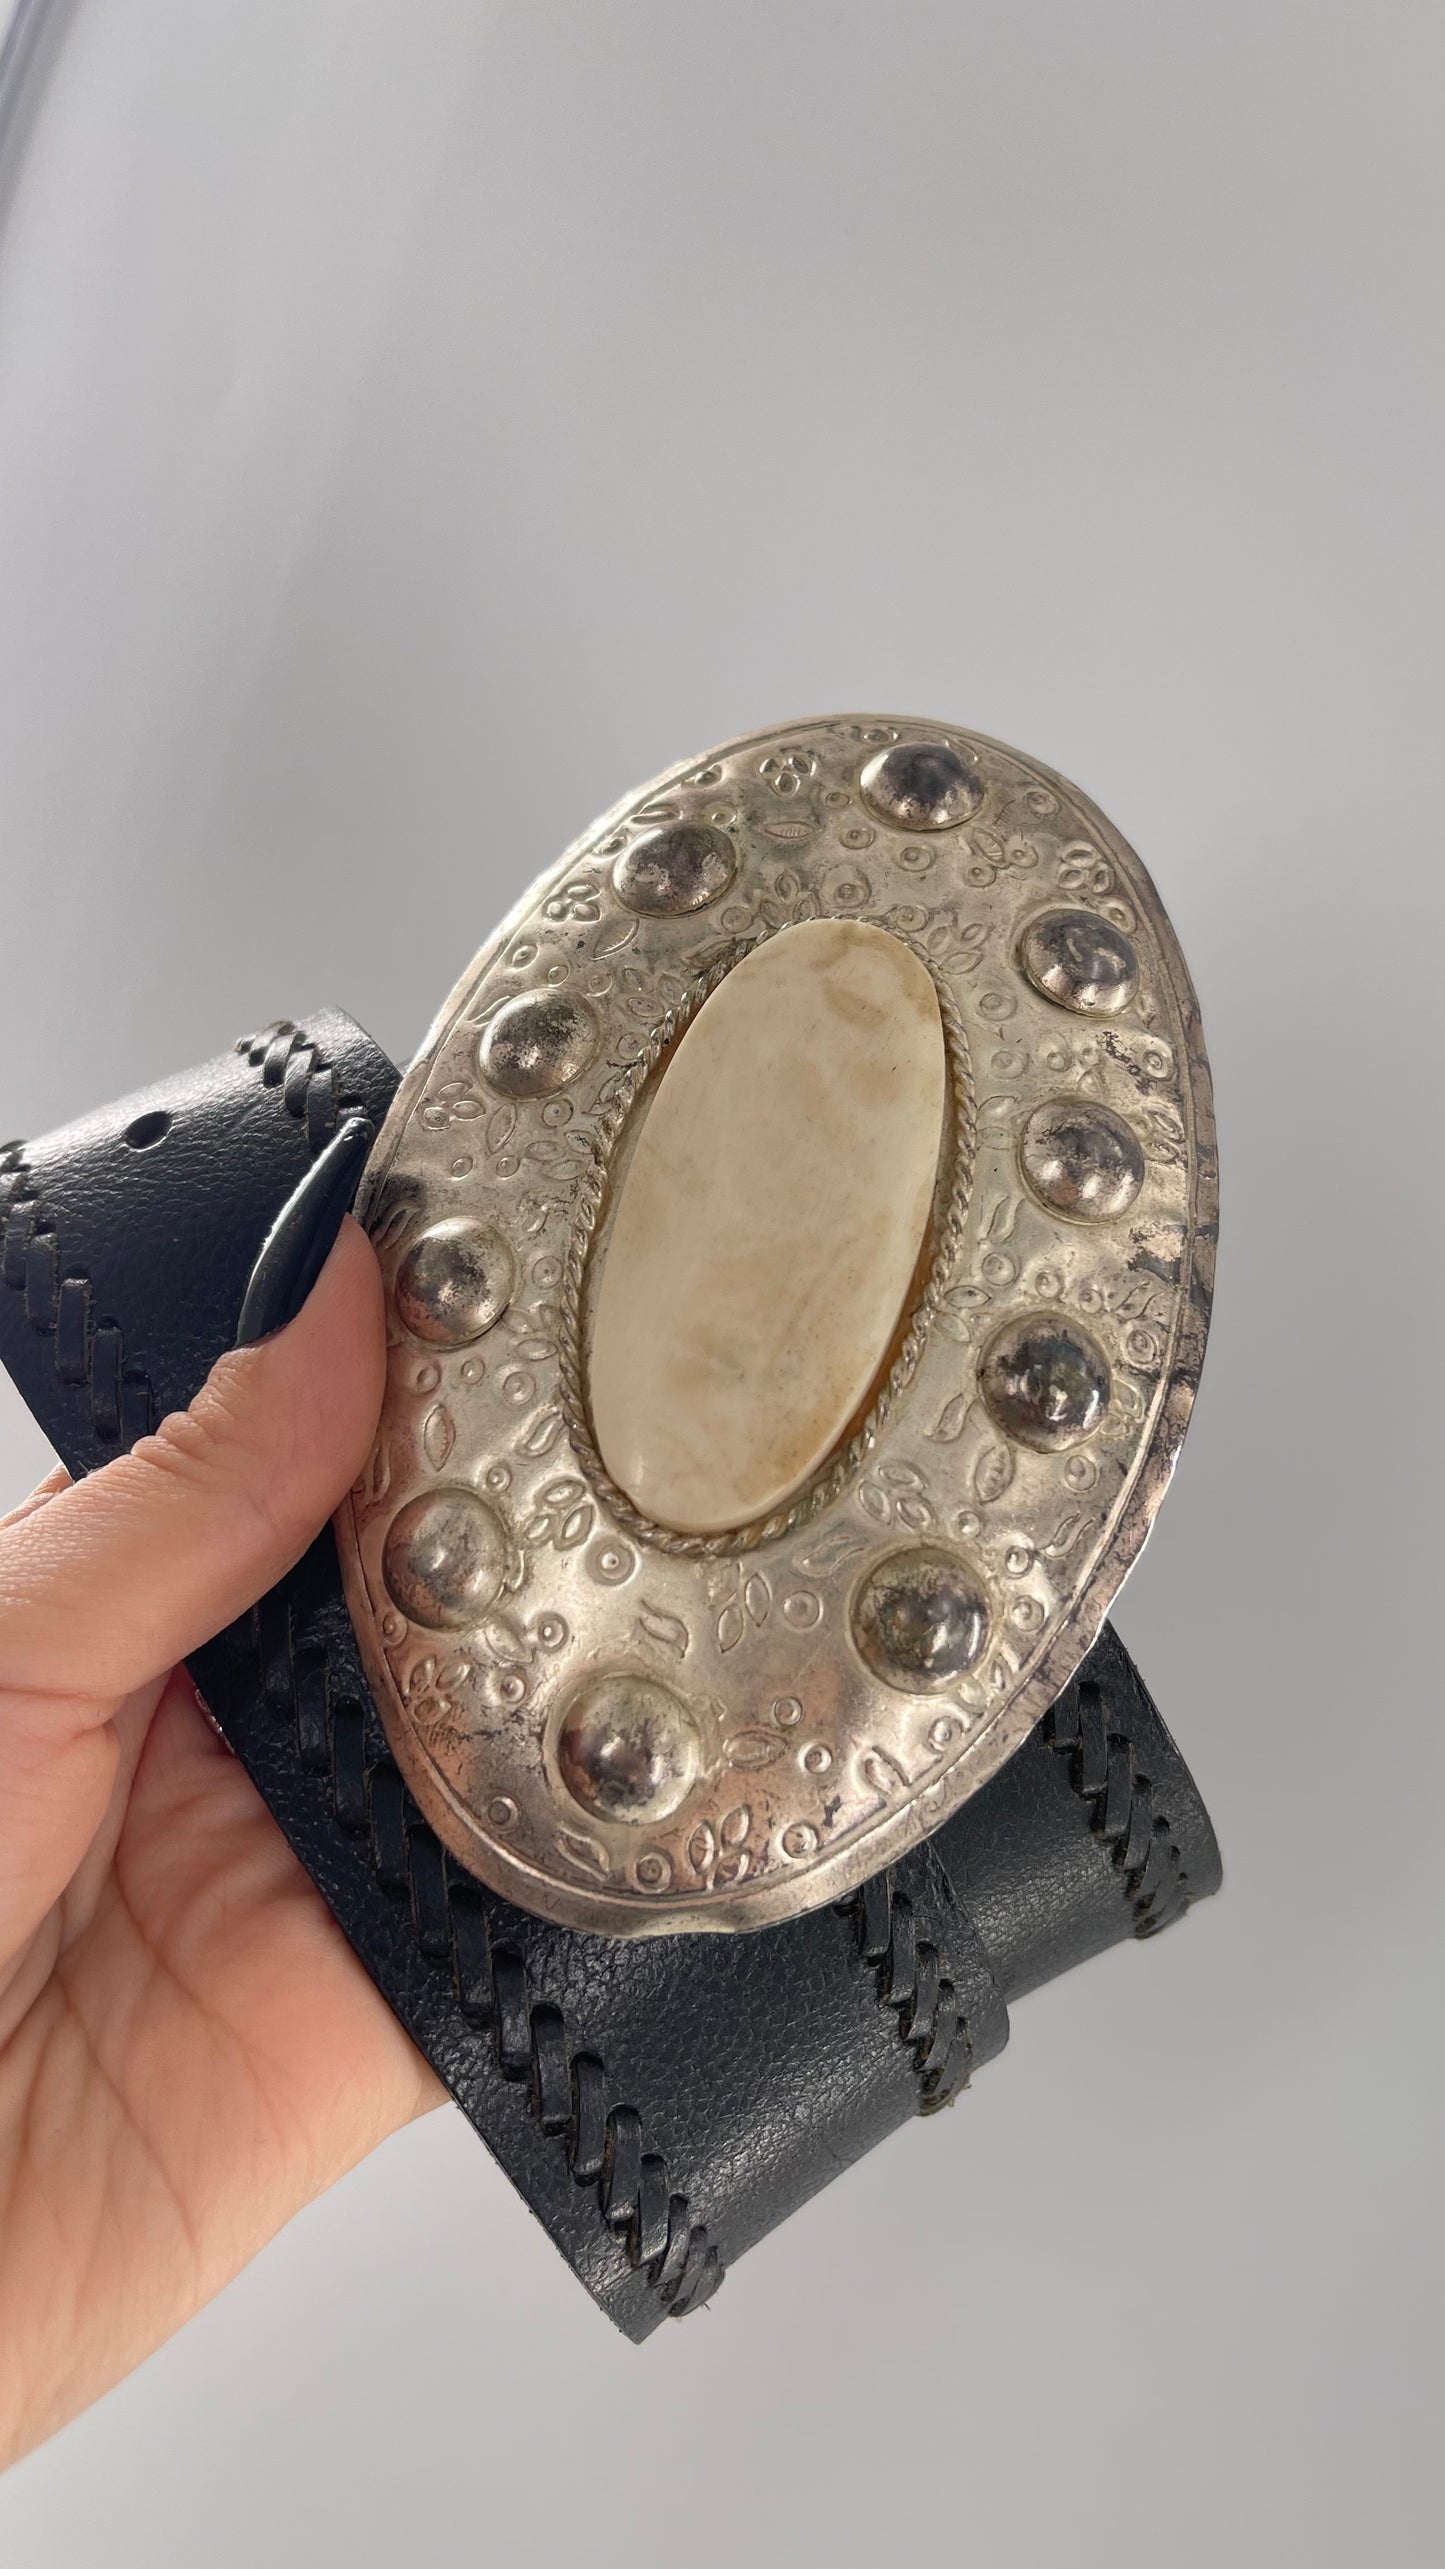 Vintage Black Leather Belt with Silver Metal Buckle with ‘Stone’ Detail (M/L)